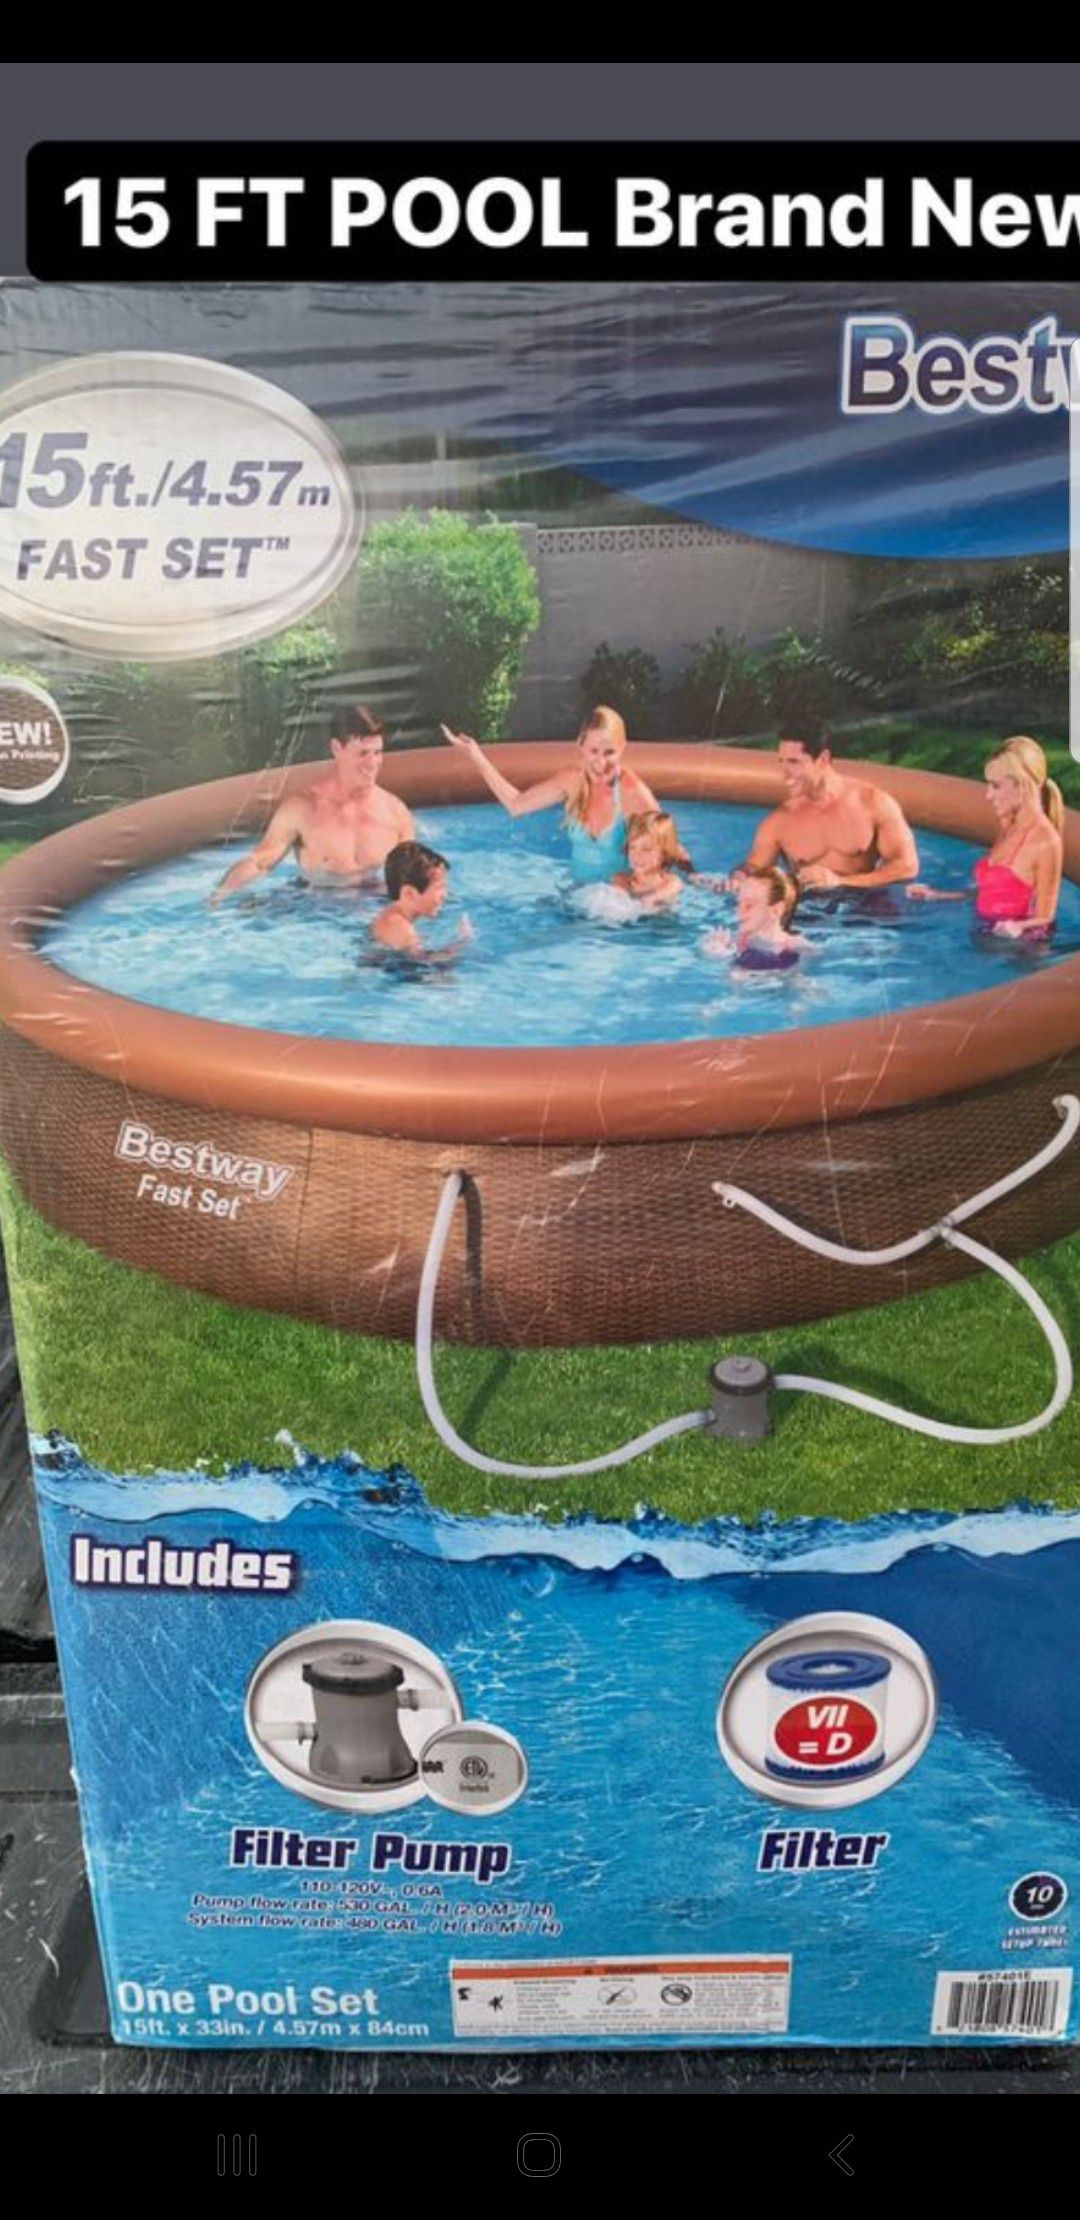 Family pool.15ft/4.57 ×33in deep